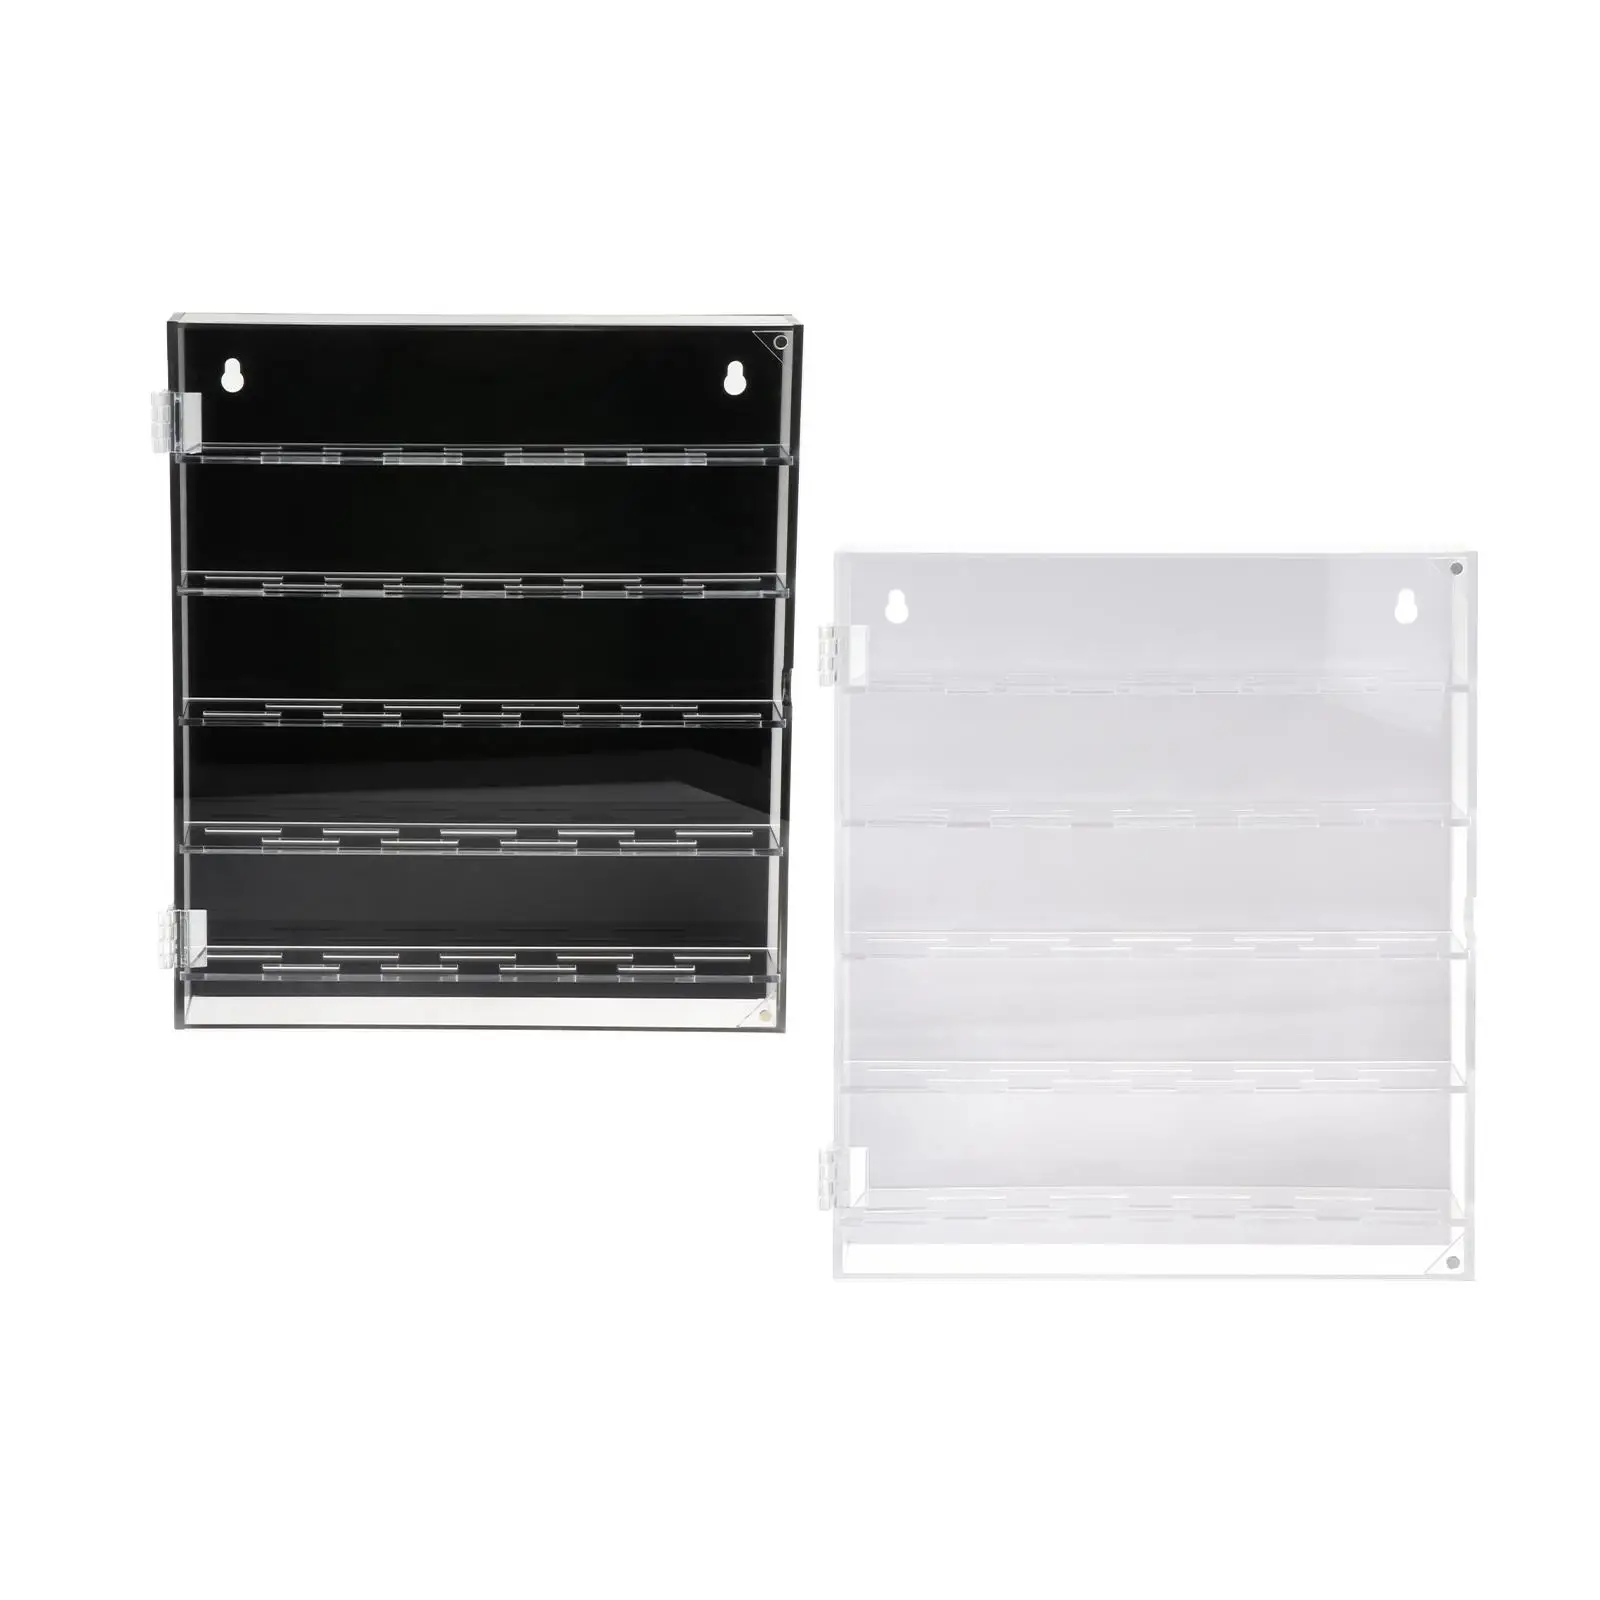 

Acrylic Display Case Showcase Organizer Collectibles Clear Storage Holder Rack for Miniature Figures Diecast Car Retail Store